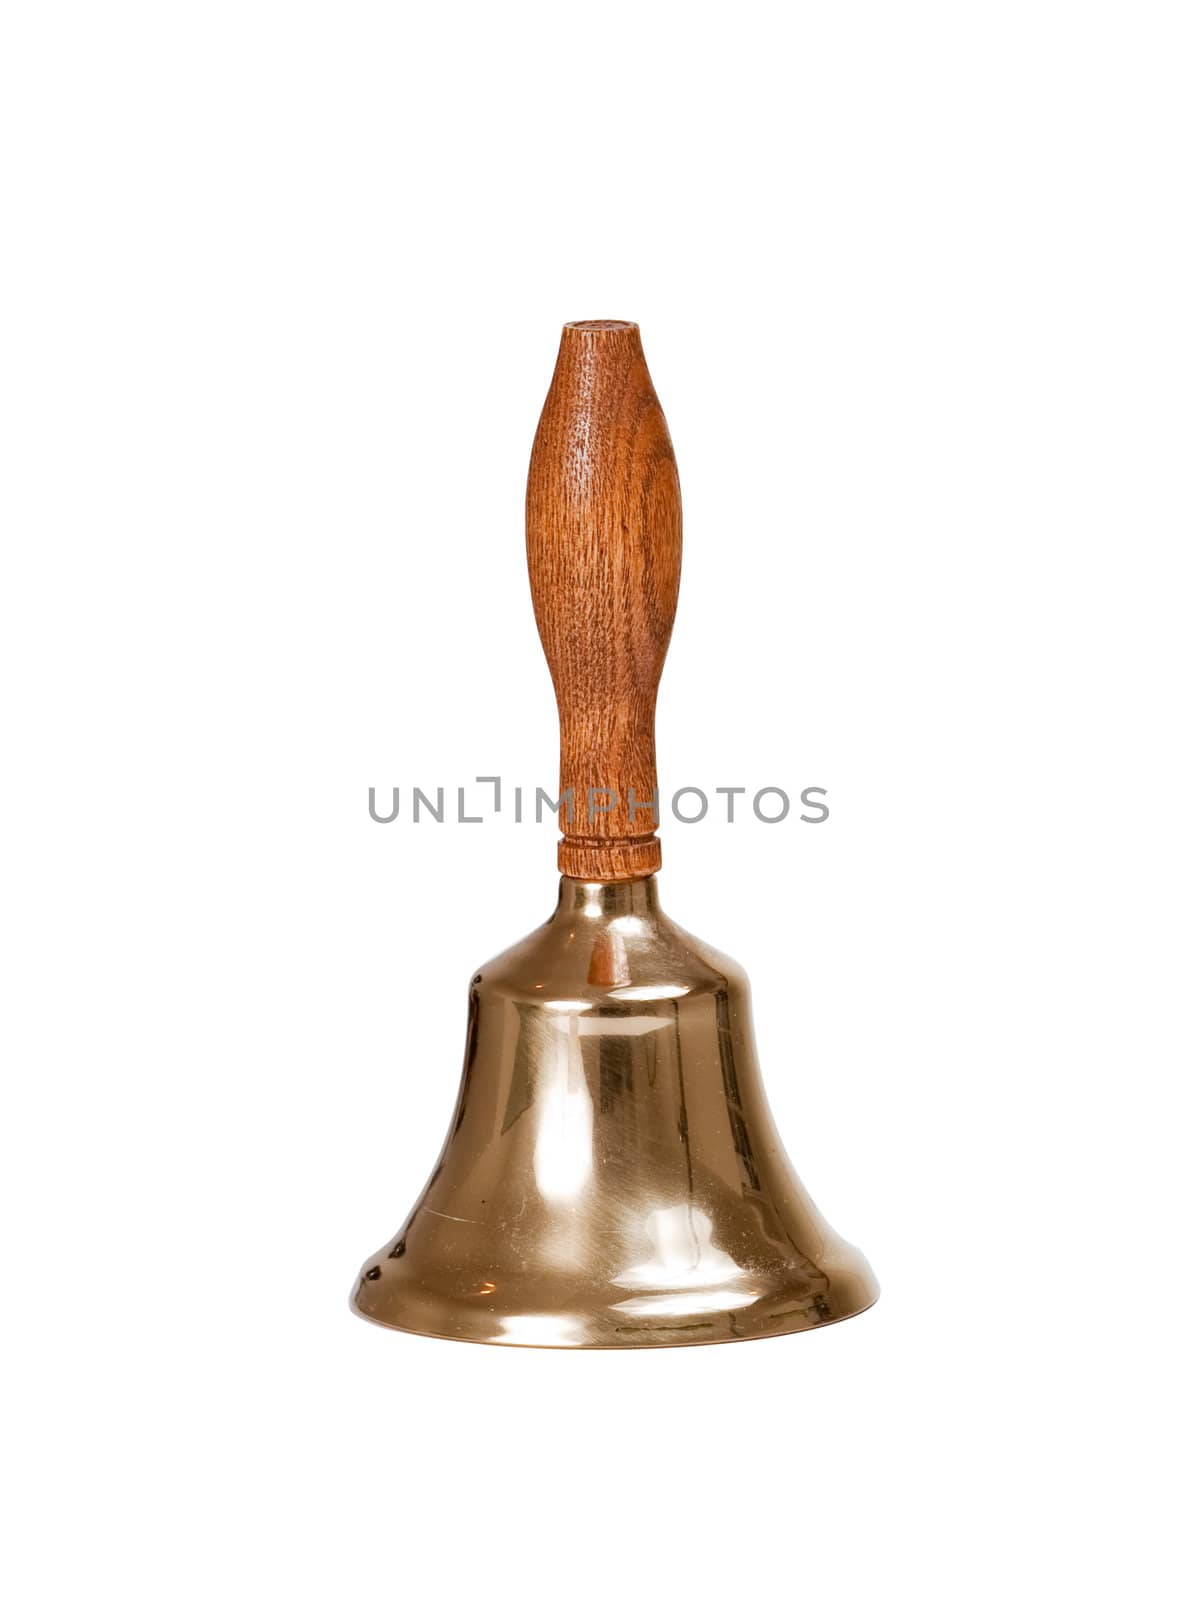 Brass handbell with wooden handle by steheap